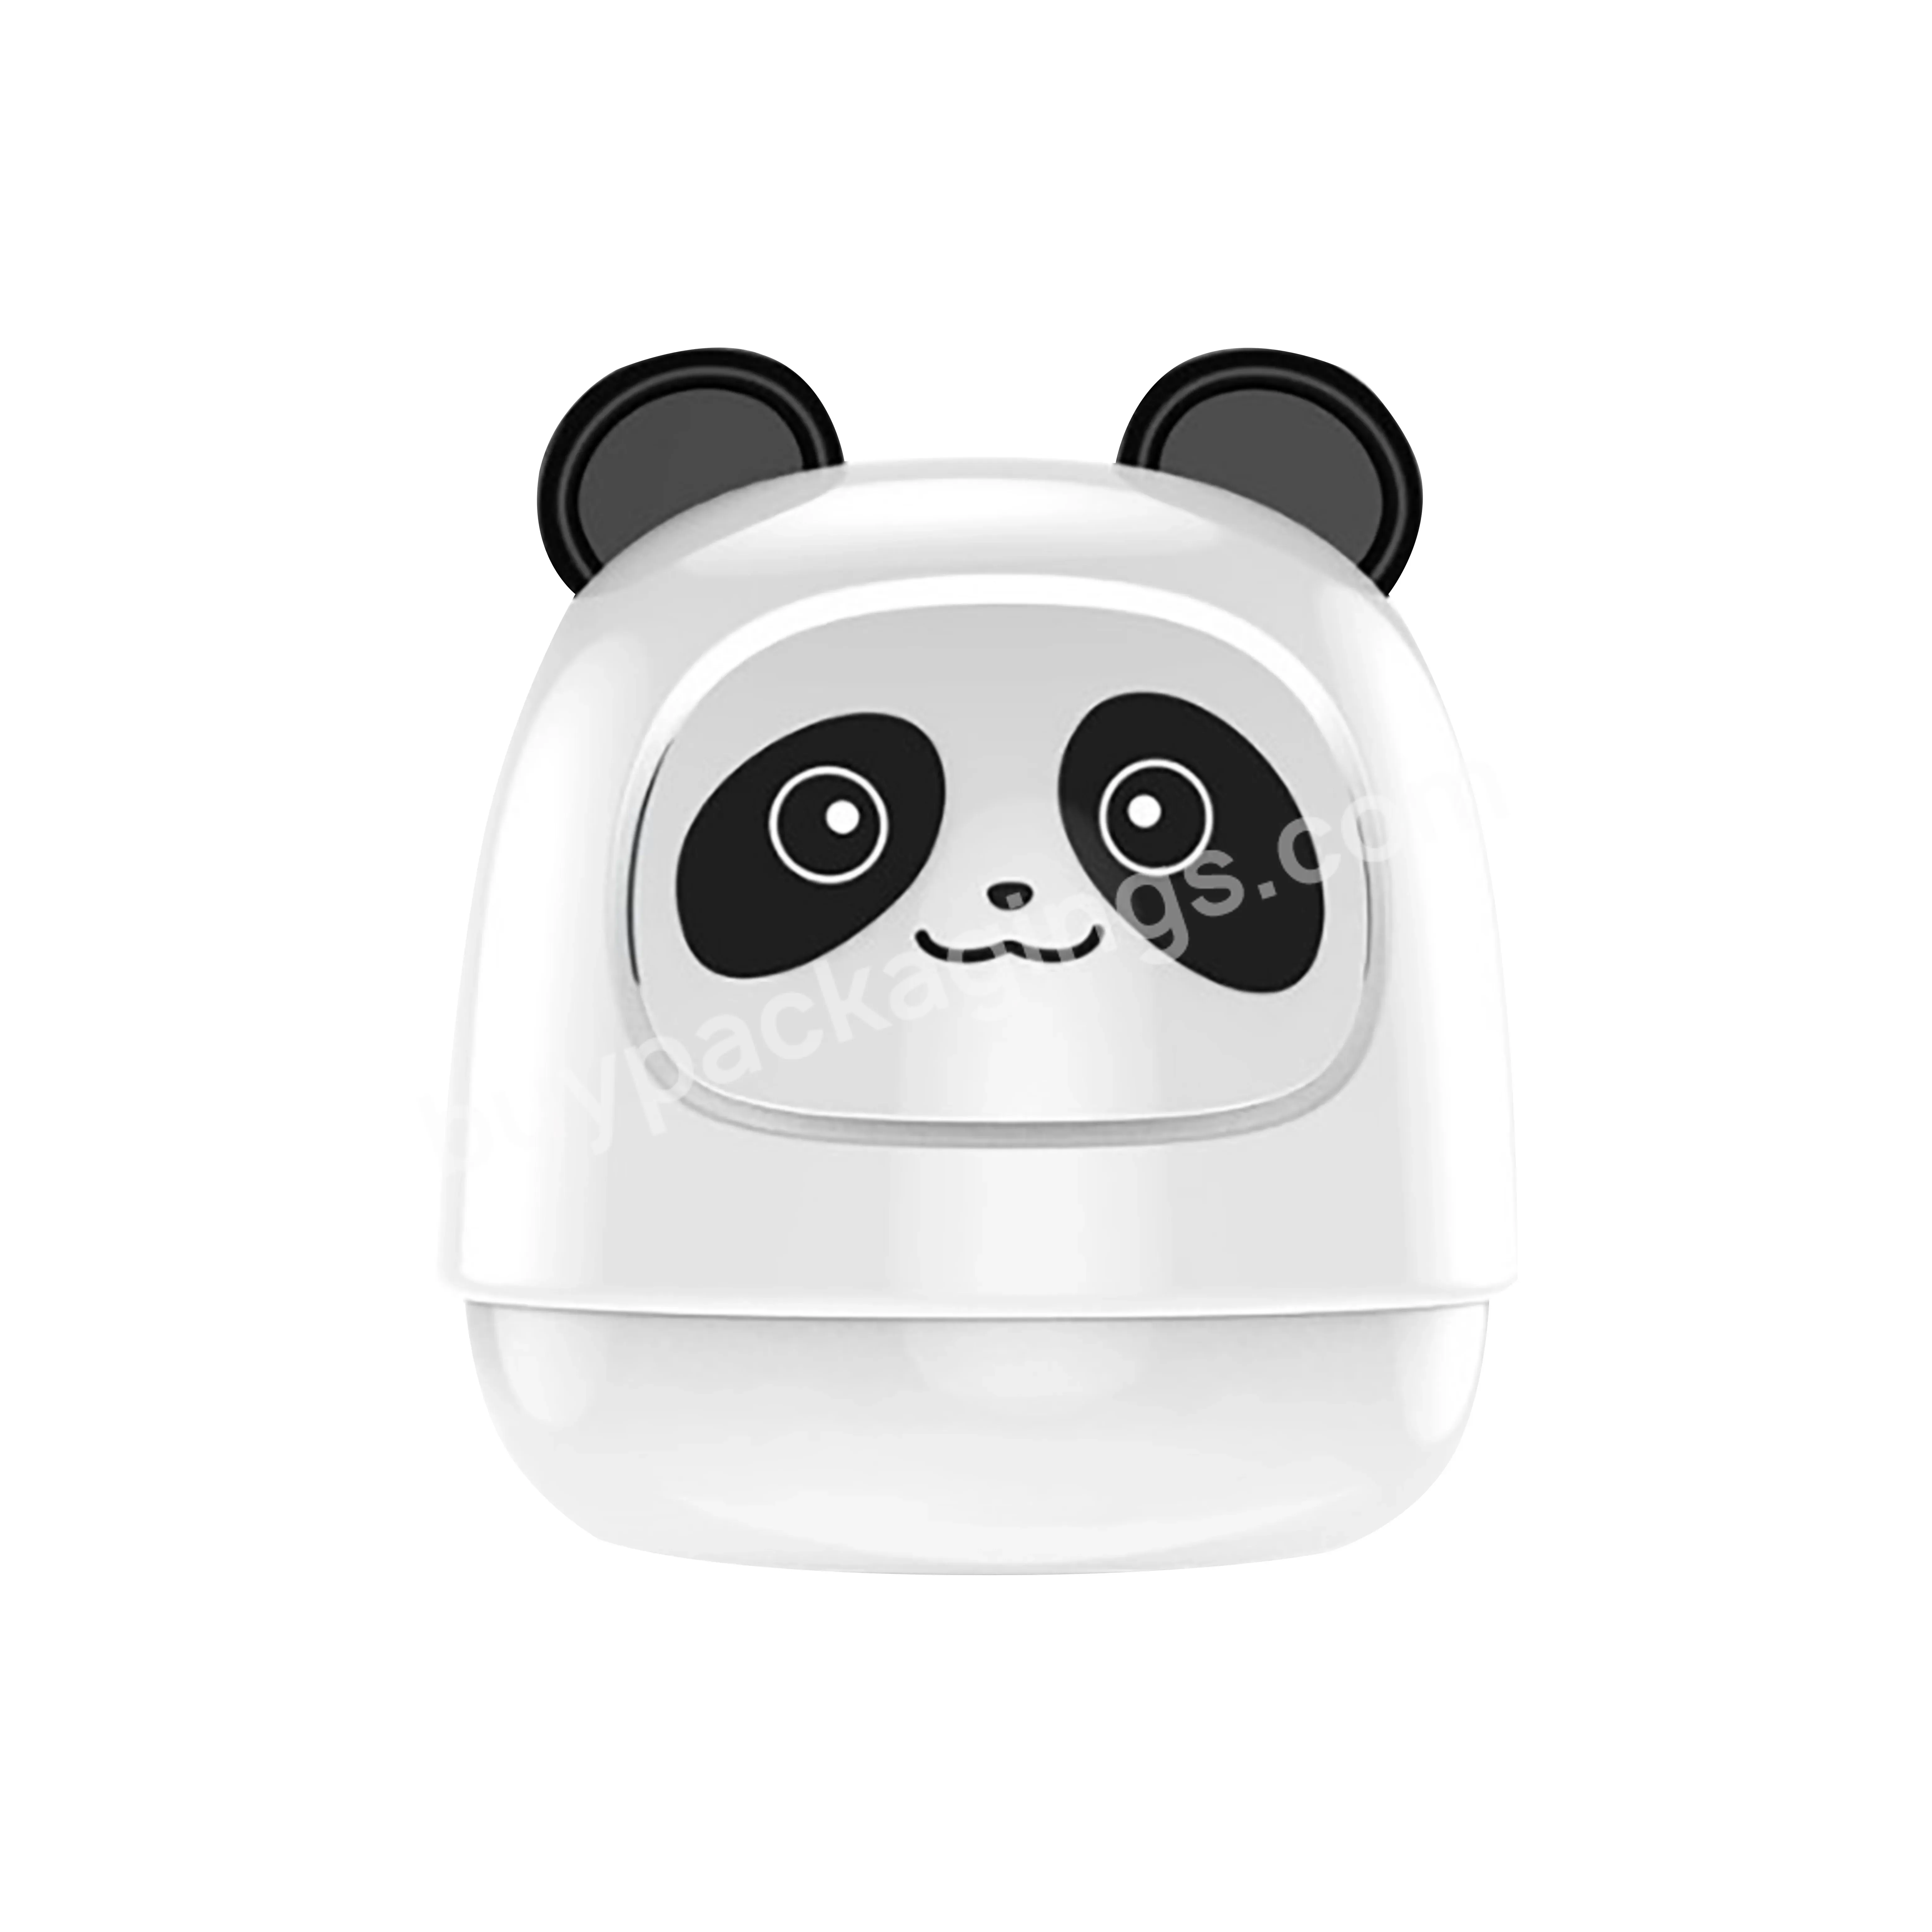 New Solid Lip Balm Lasting Light Fragrance Panda Cartoon Doll Perfume Ornaments Car Aromatherapy Container For Car Decoration - Buy New Solid Lip Balm Lasting Light Fragrance Container,Panda Cartoon Doll Perfume Ornaments Car Aromatherapy Container,C